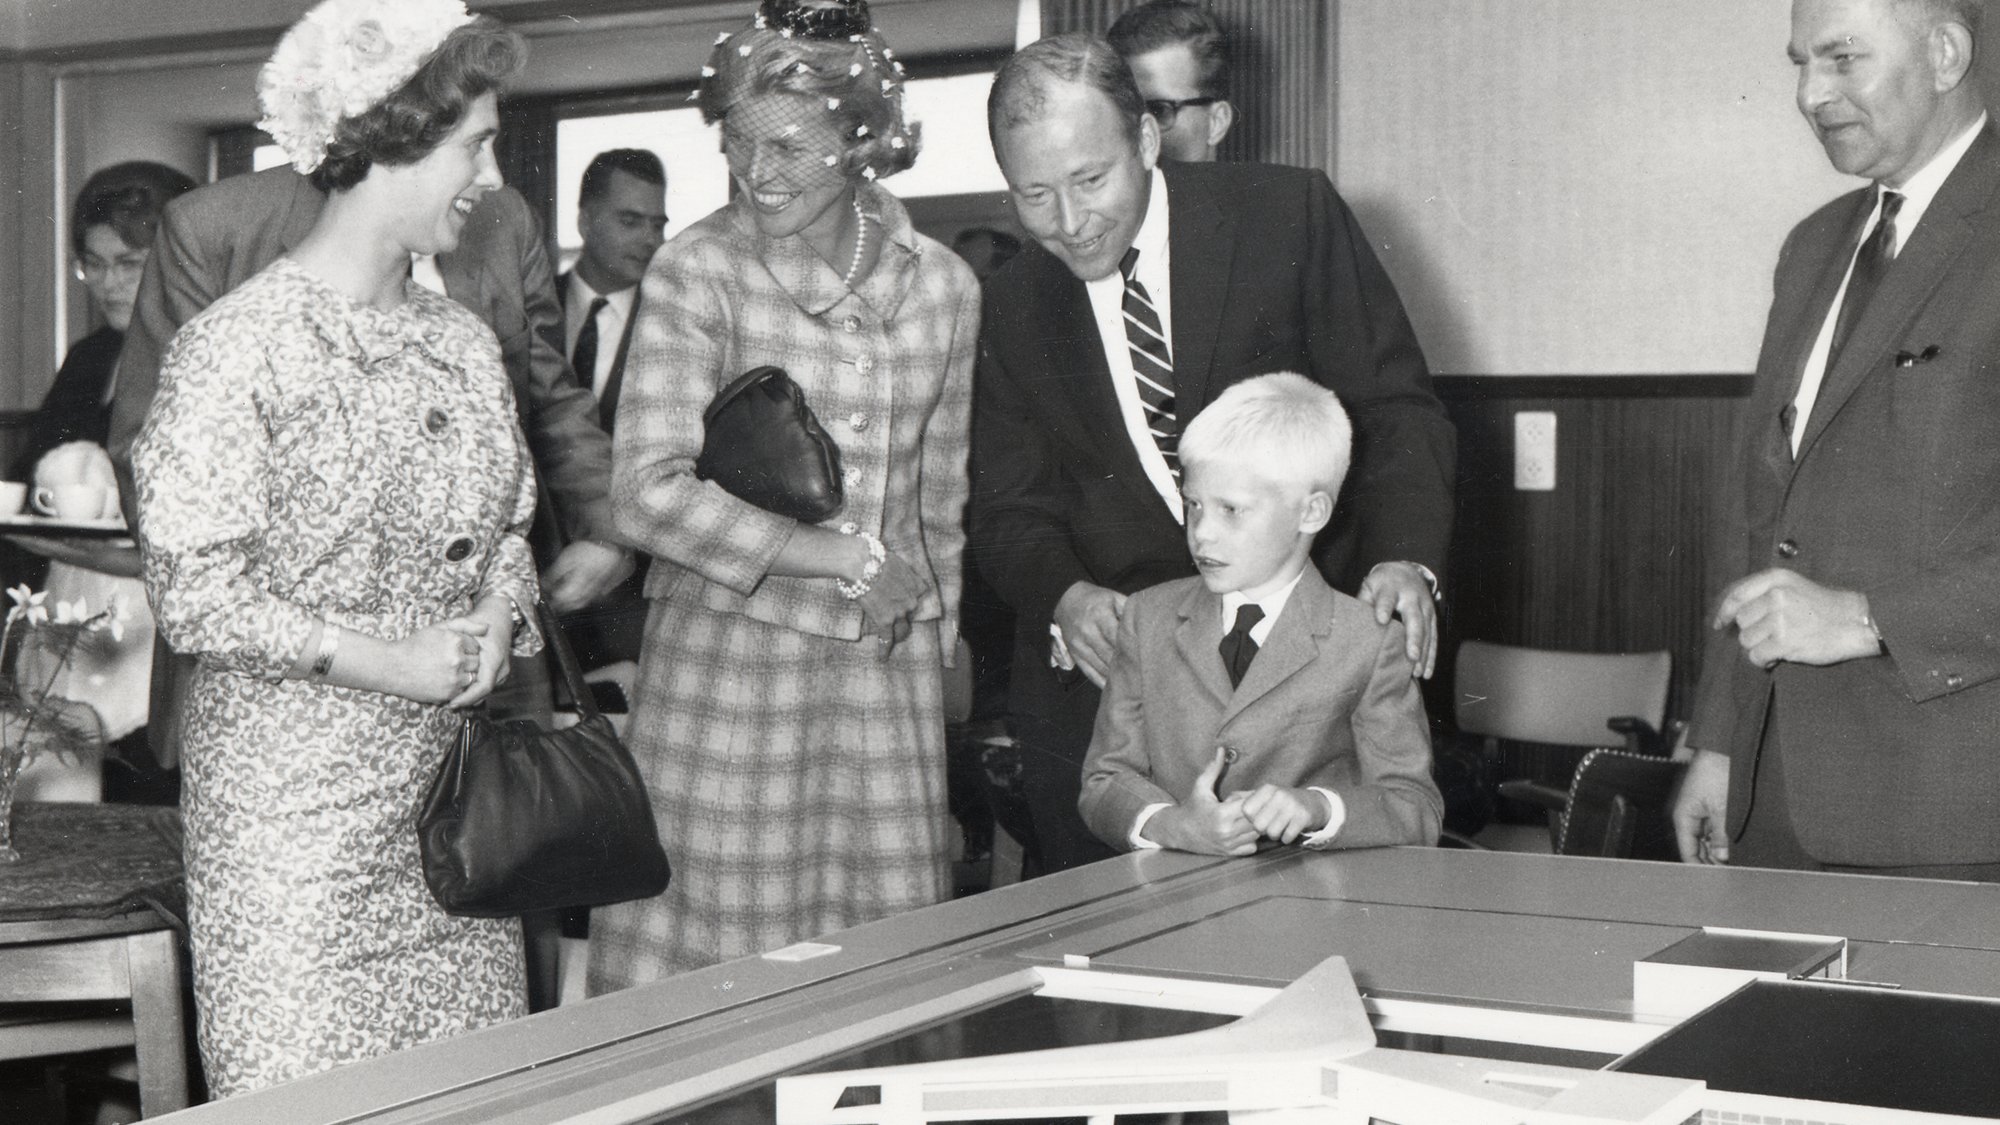 Sam johnson and his family examine an architectural model of europlant at the groundbreaking ceremony in 1963.